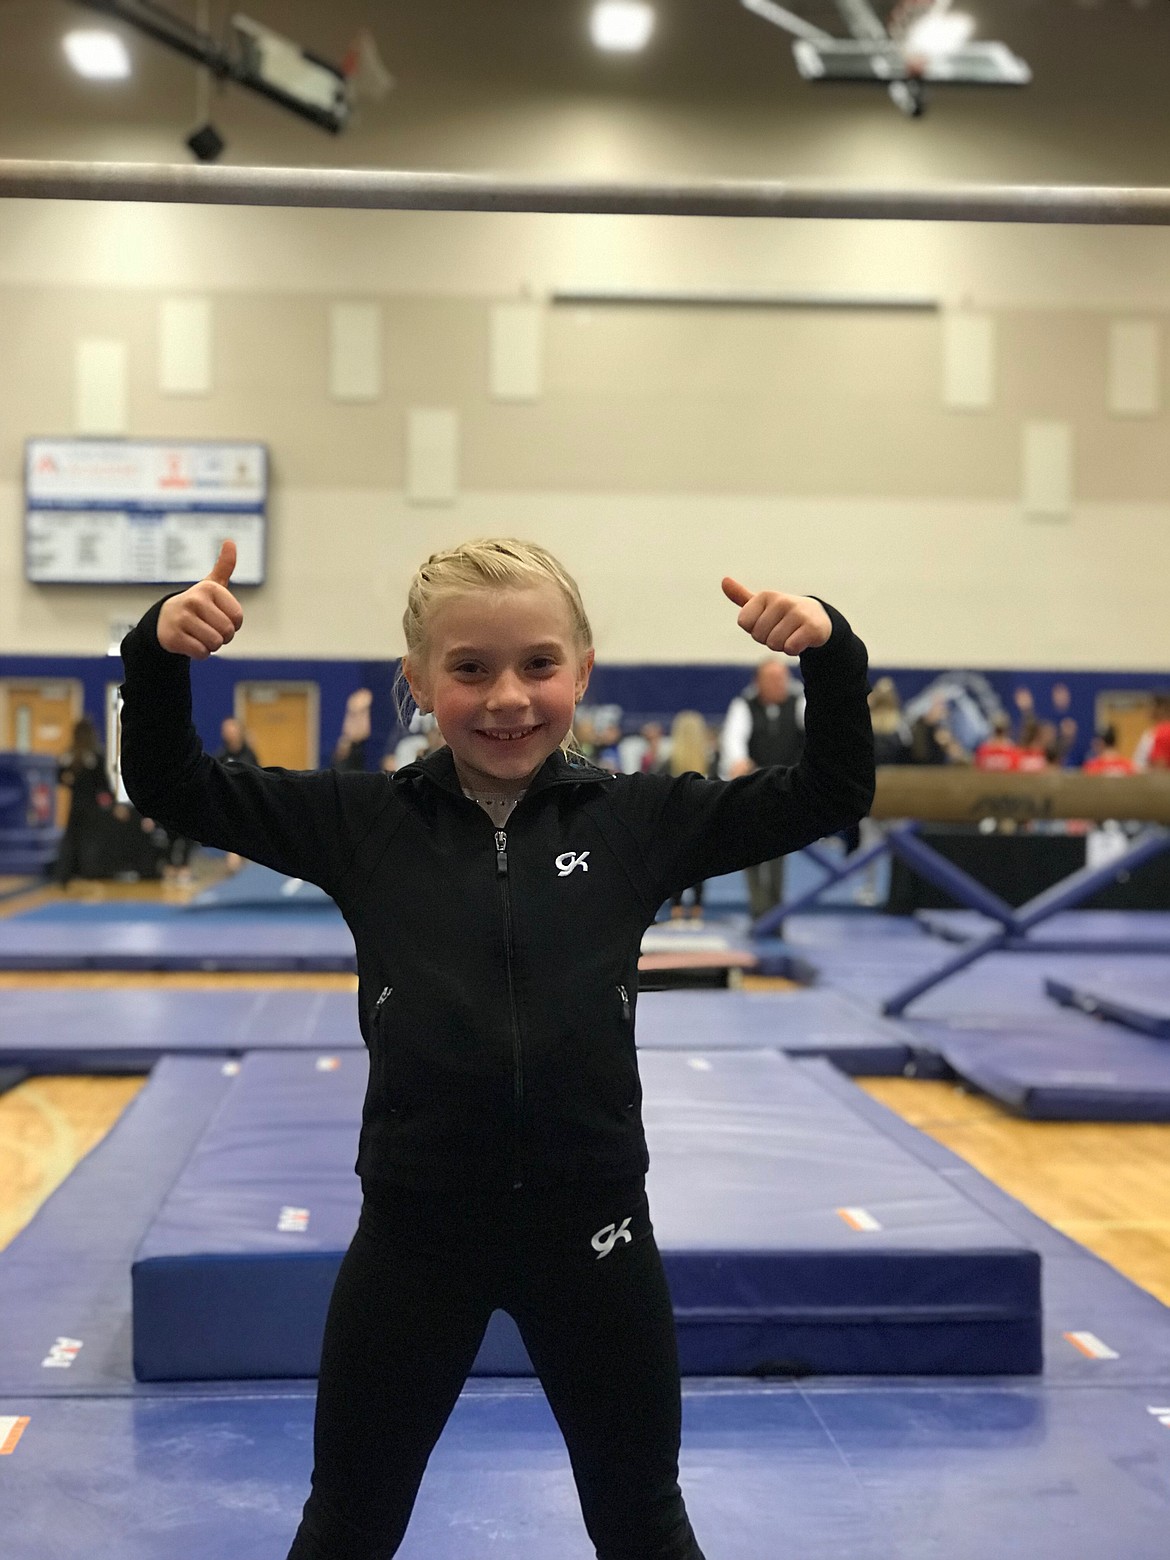 Courtesy photo
Avant Coeur Xcel silver gymnast Dakota Hoch competed at the recent state championships in Boise.